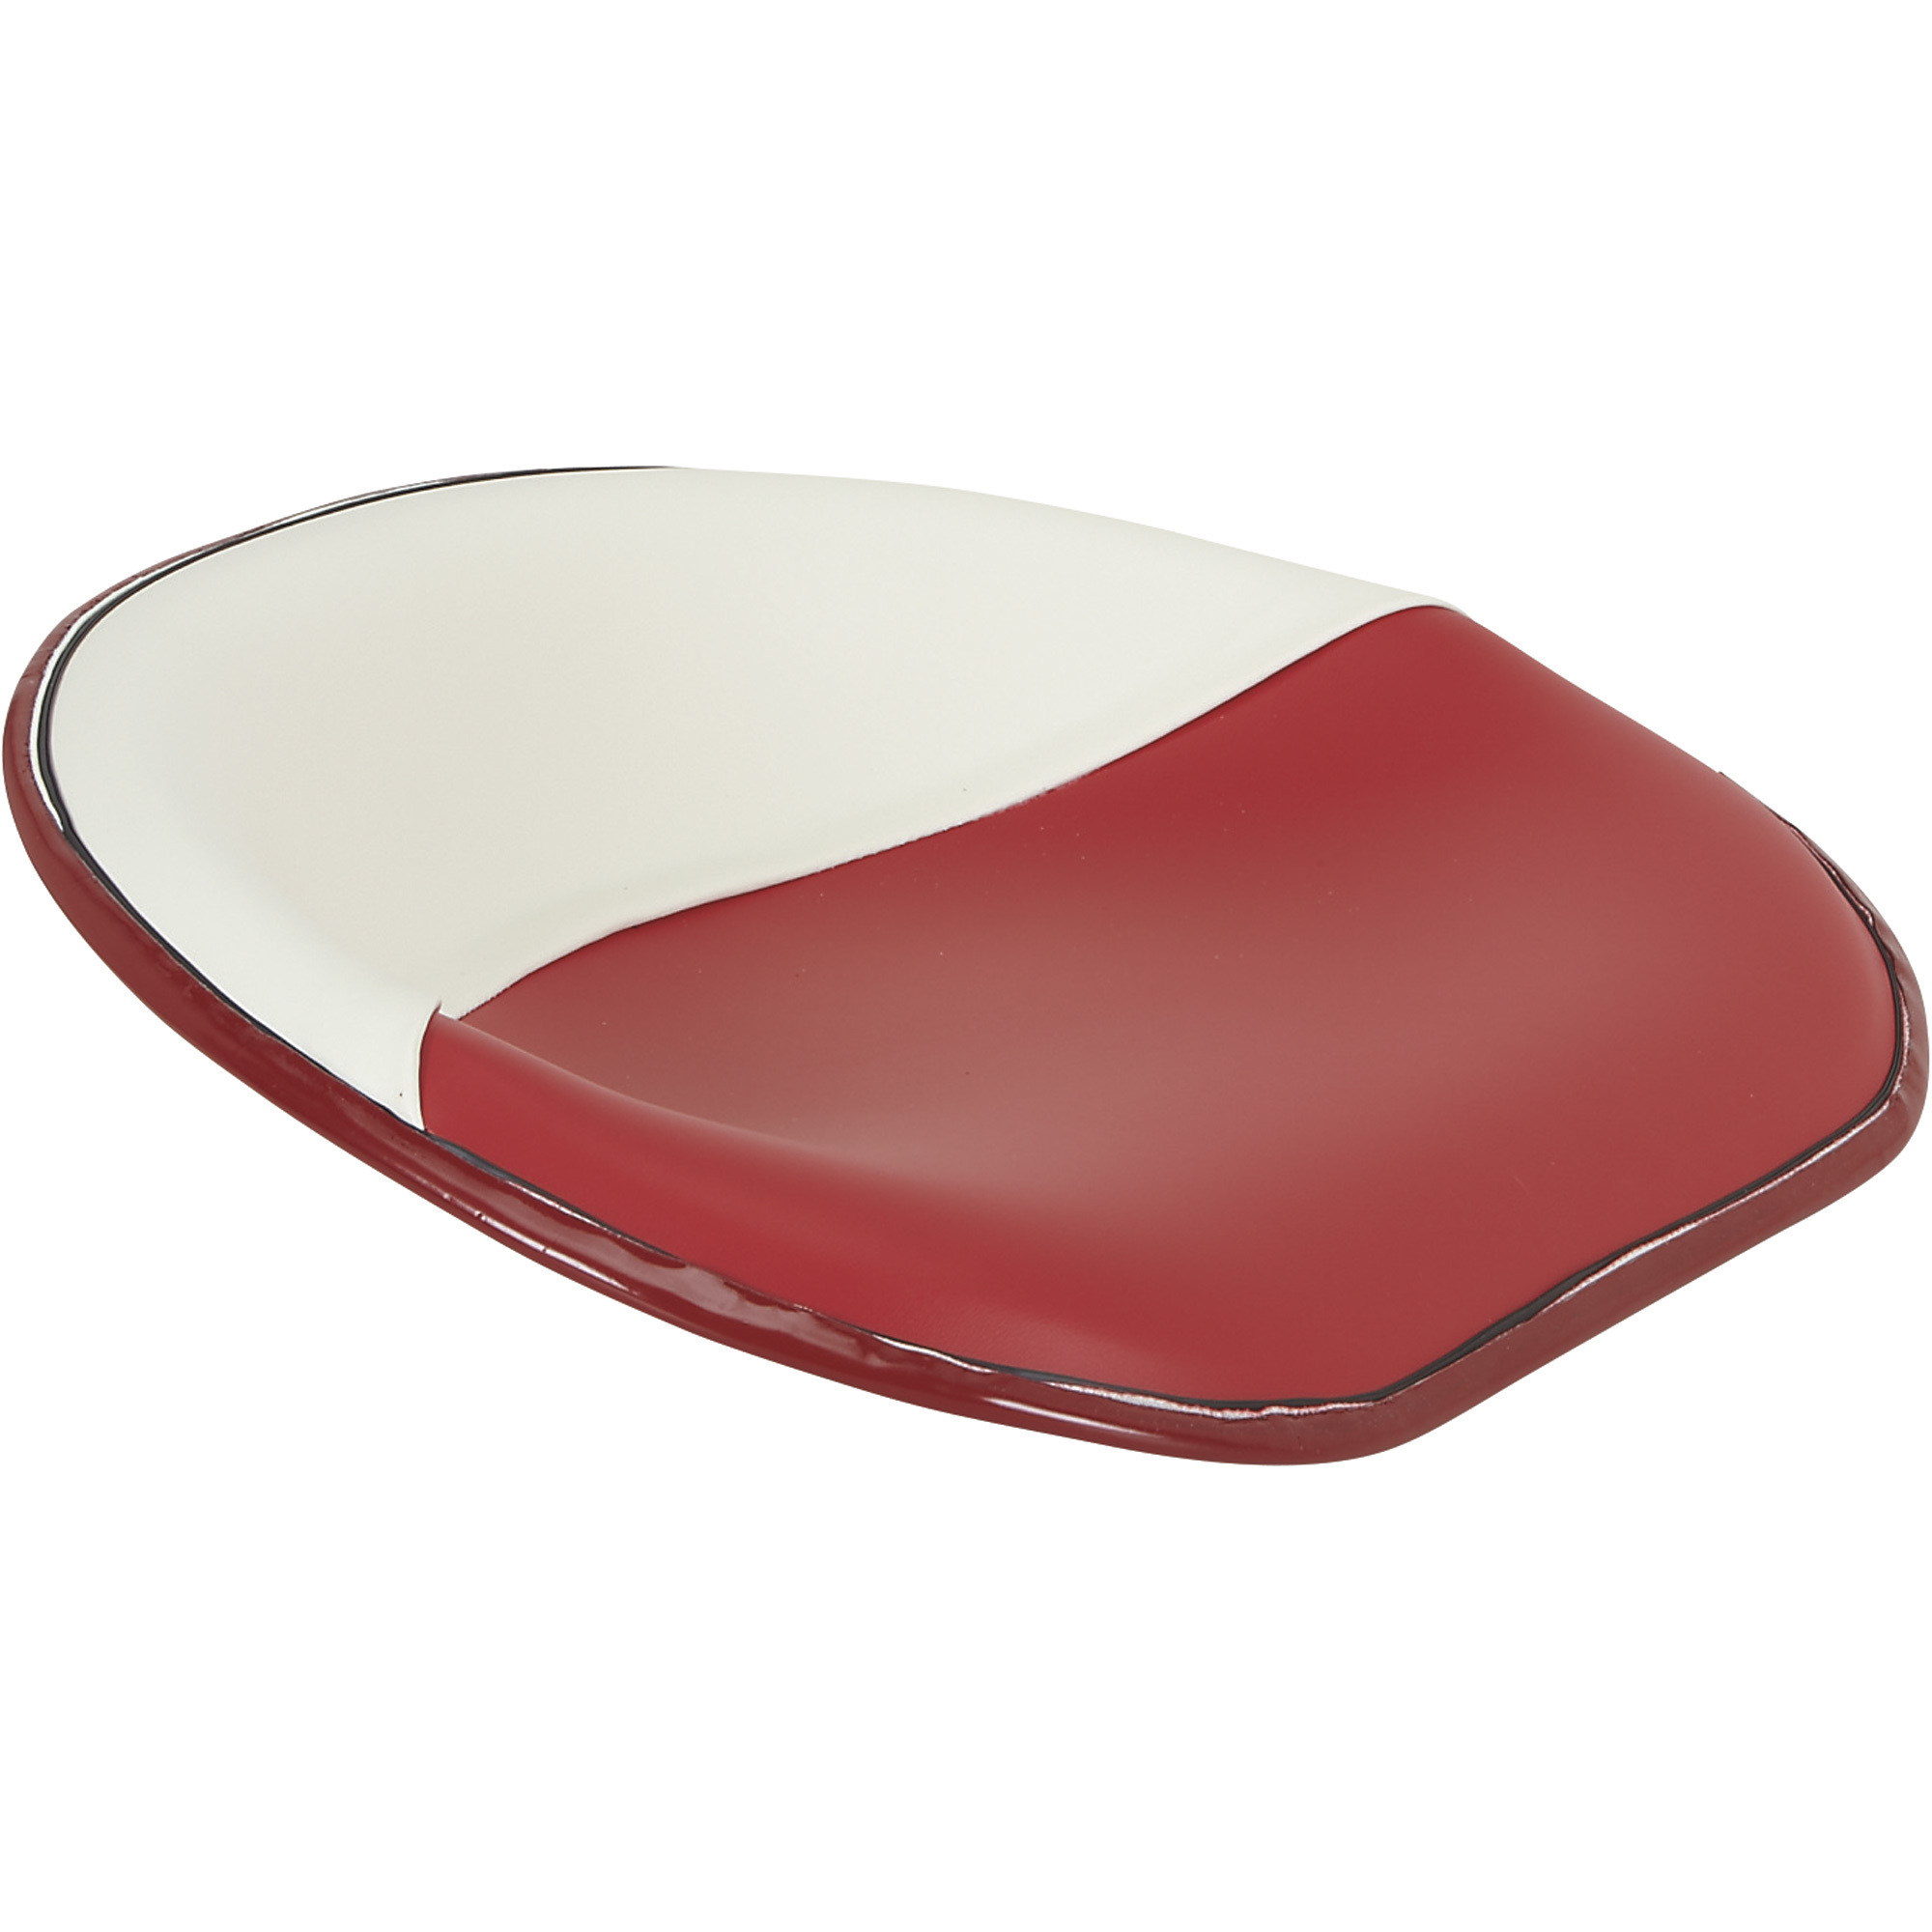 K & M Pan Seat for IH Tractors, Red and White, Model 7181